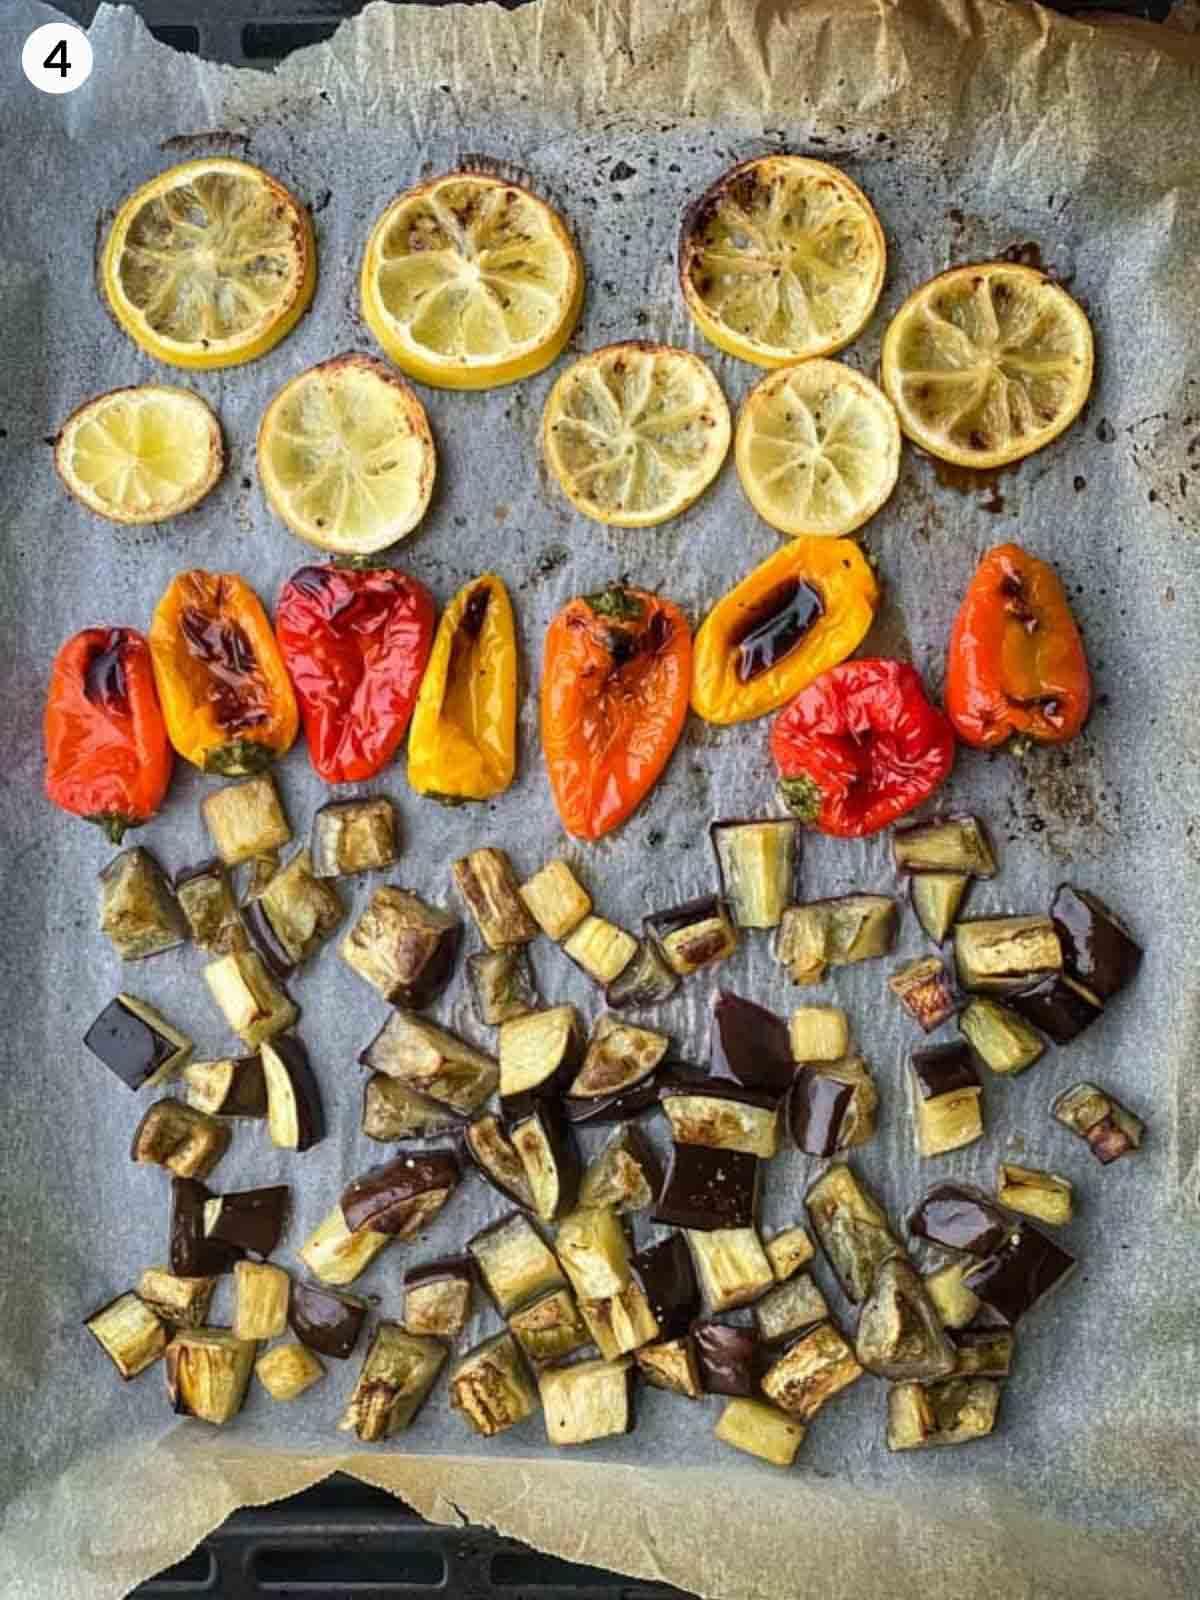 roasted lemon, bell peppers and eggplant on a lined baking tray